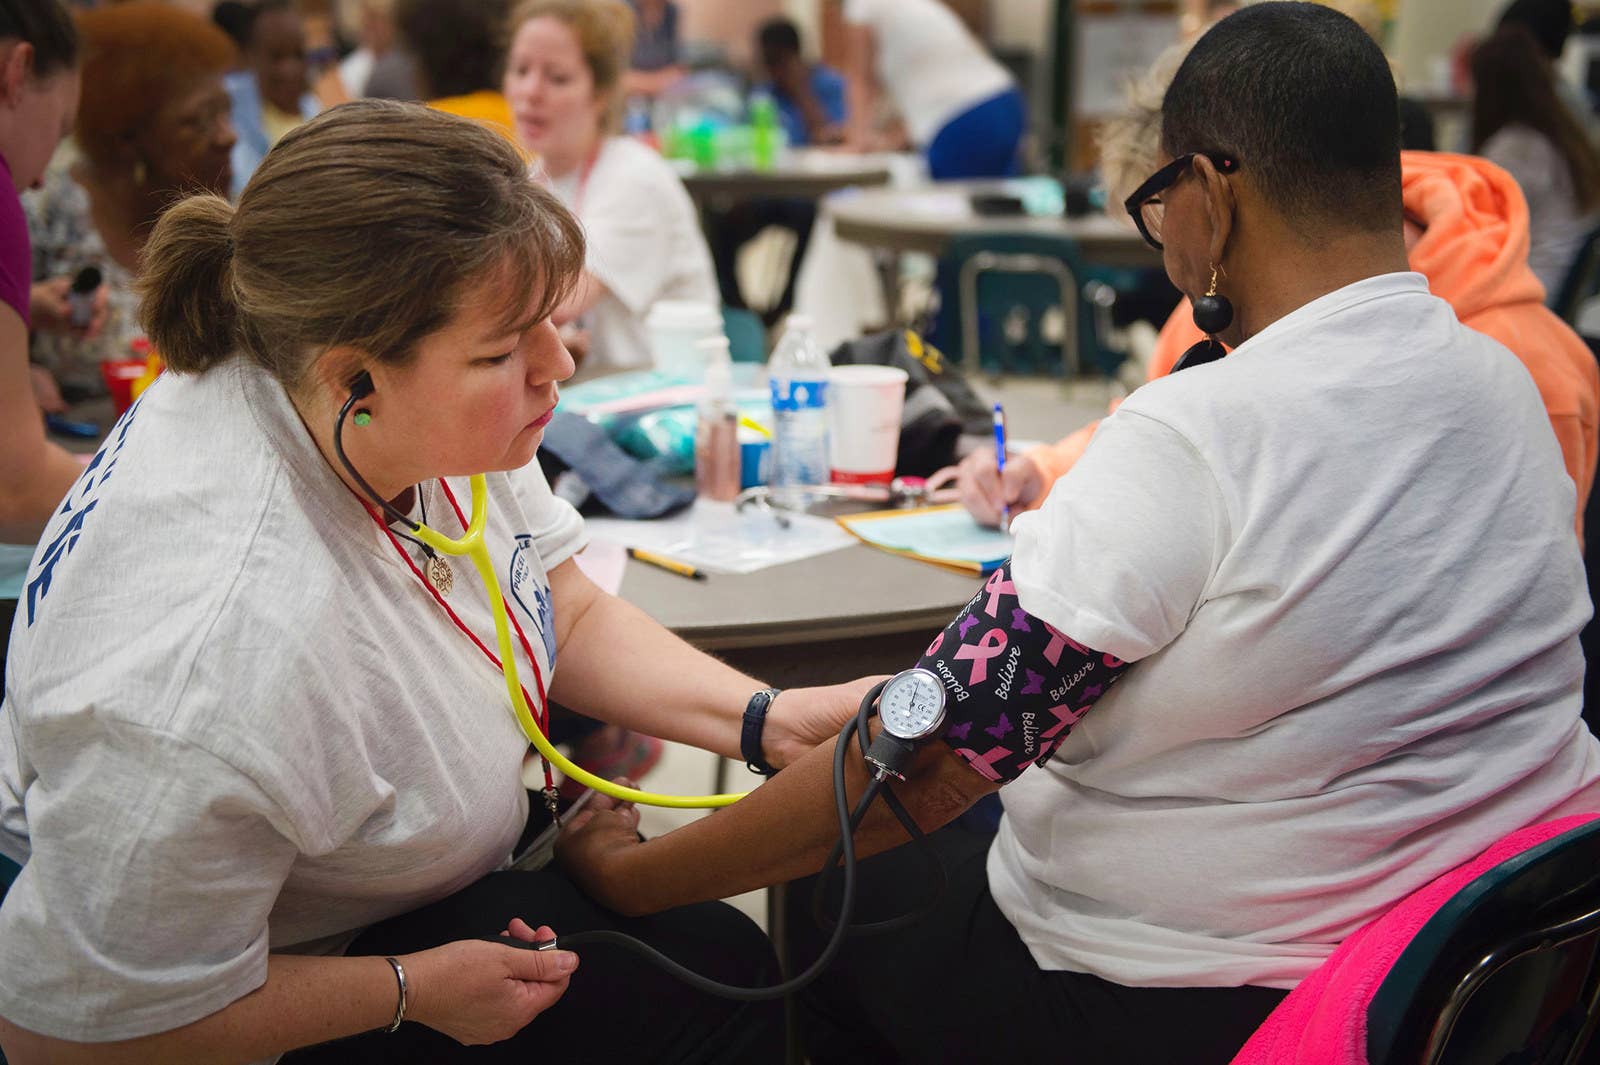 A nurse checks the blood pressure of a patient at Greensville County High School on June 25.